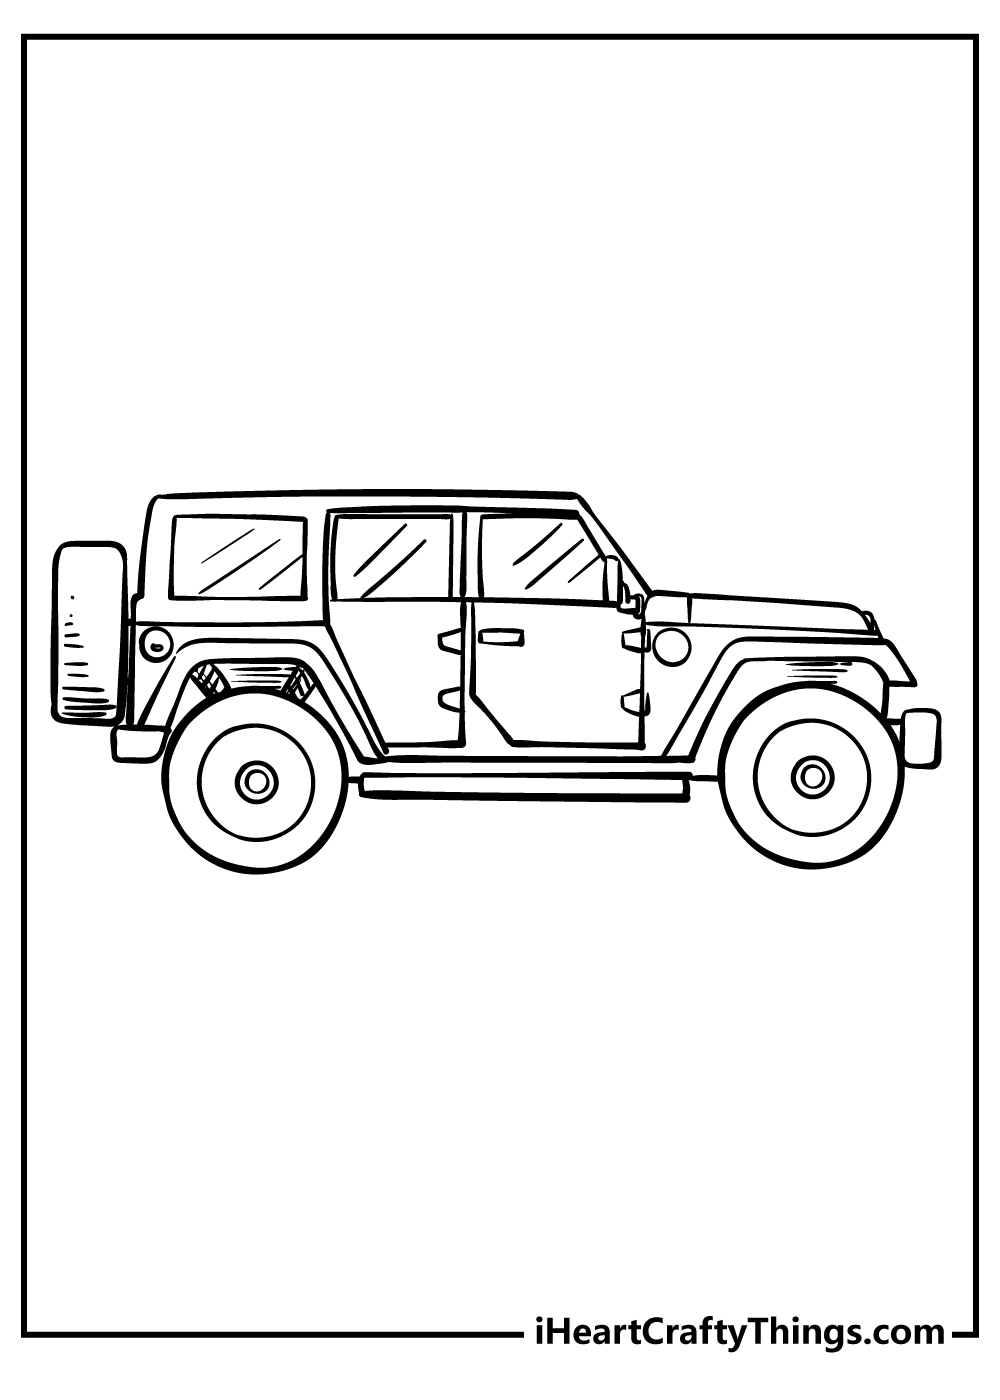 Jeep Coloring Pages free pdf download